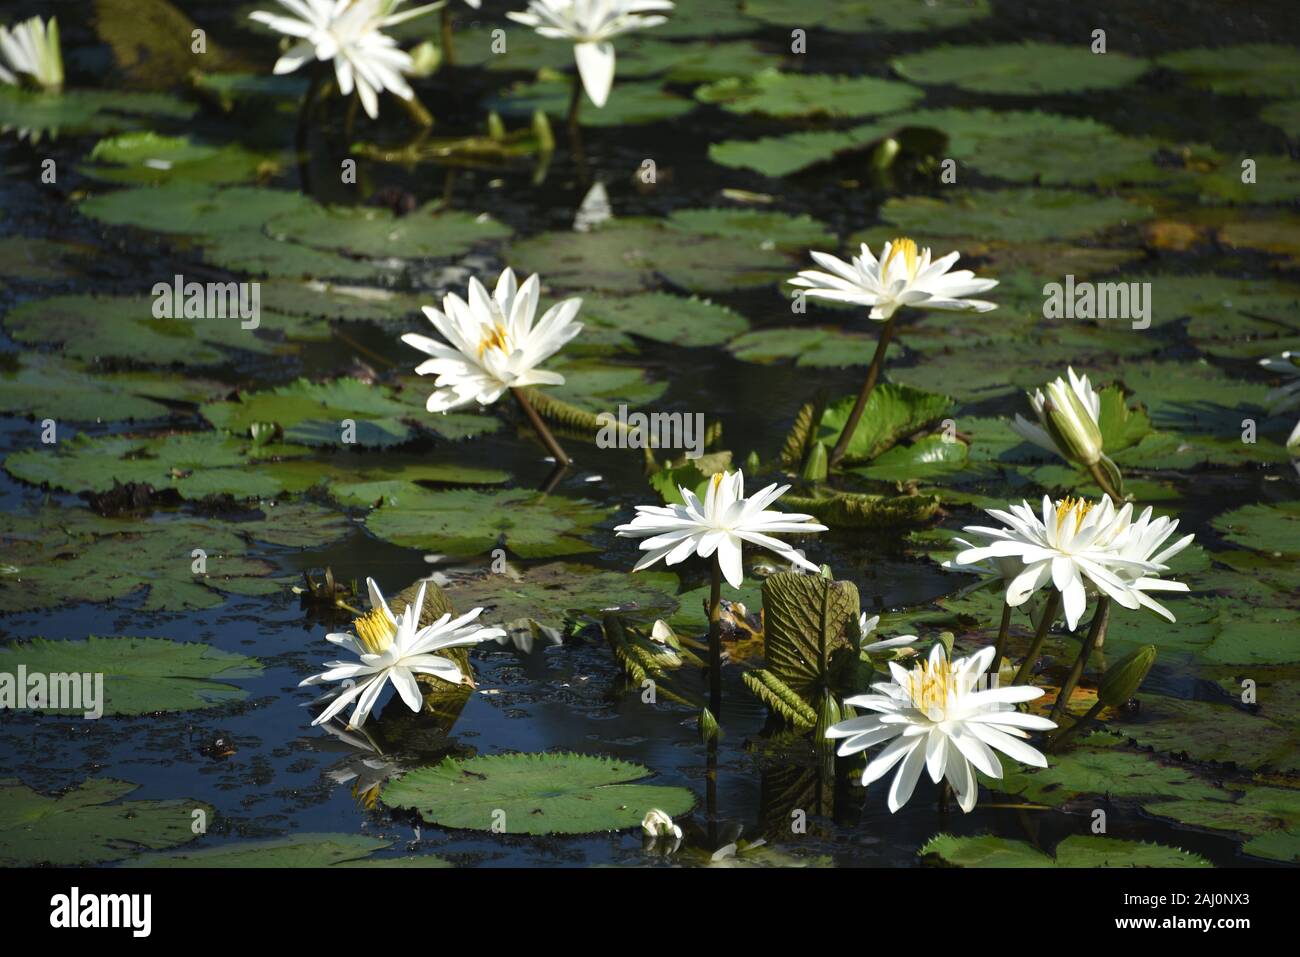 A full framed view of water lilies blooming in a pond of the Botanic Gardens of Cairns, Australia Stock Photo